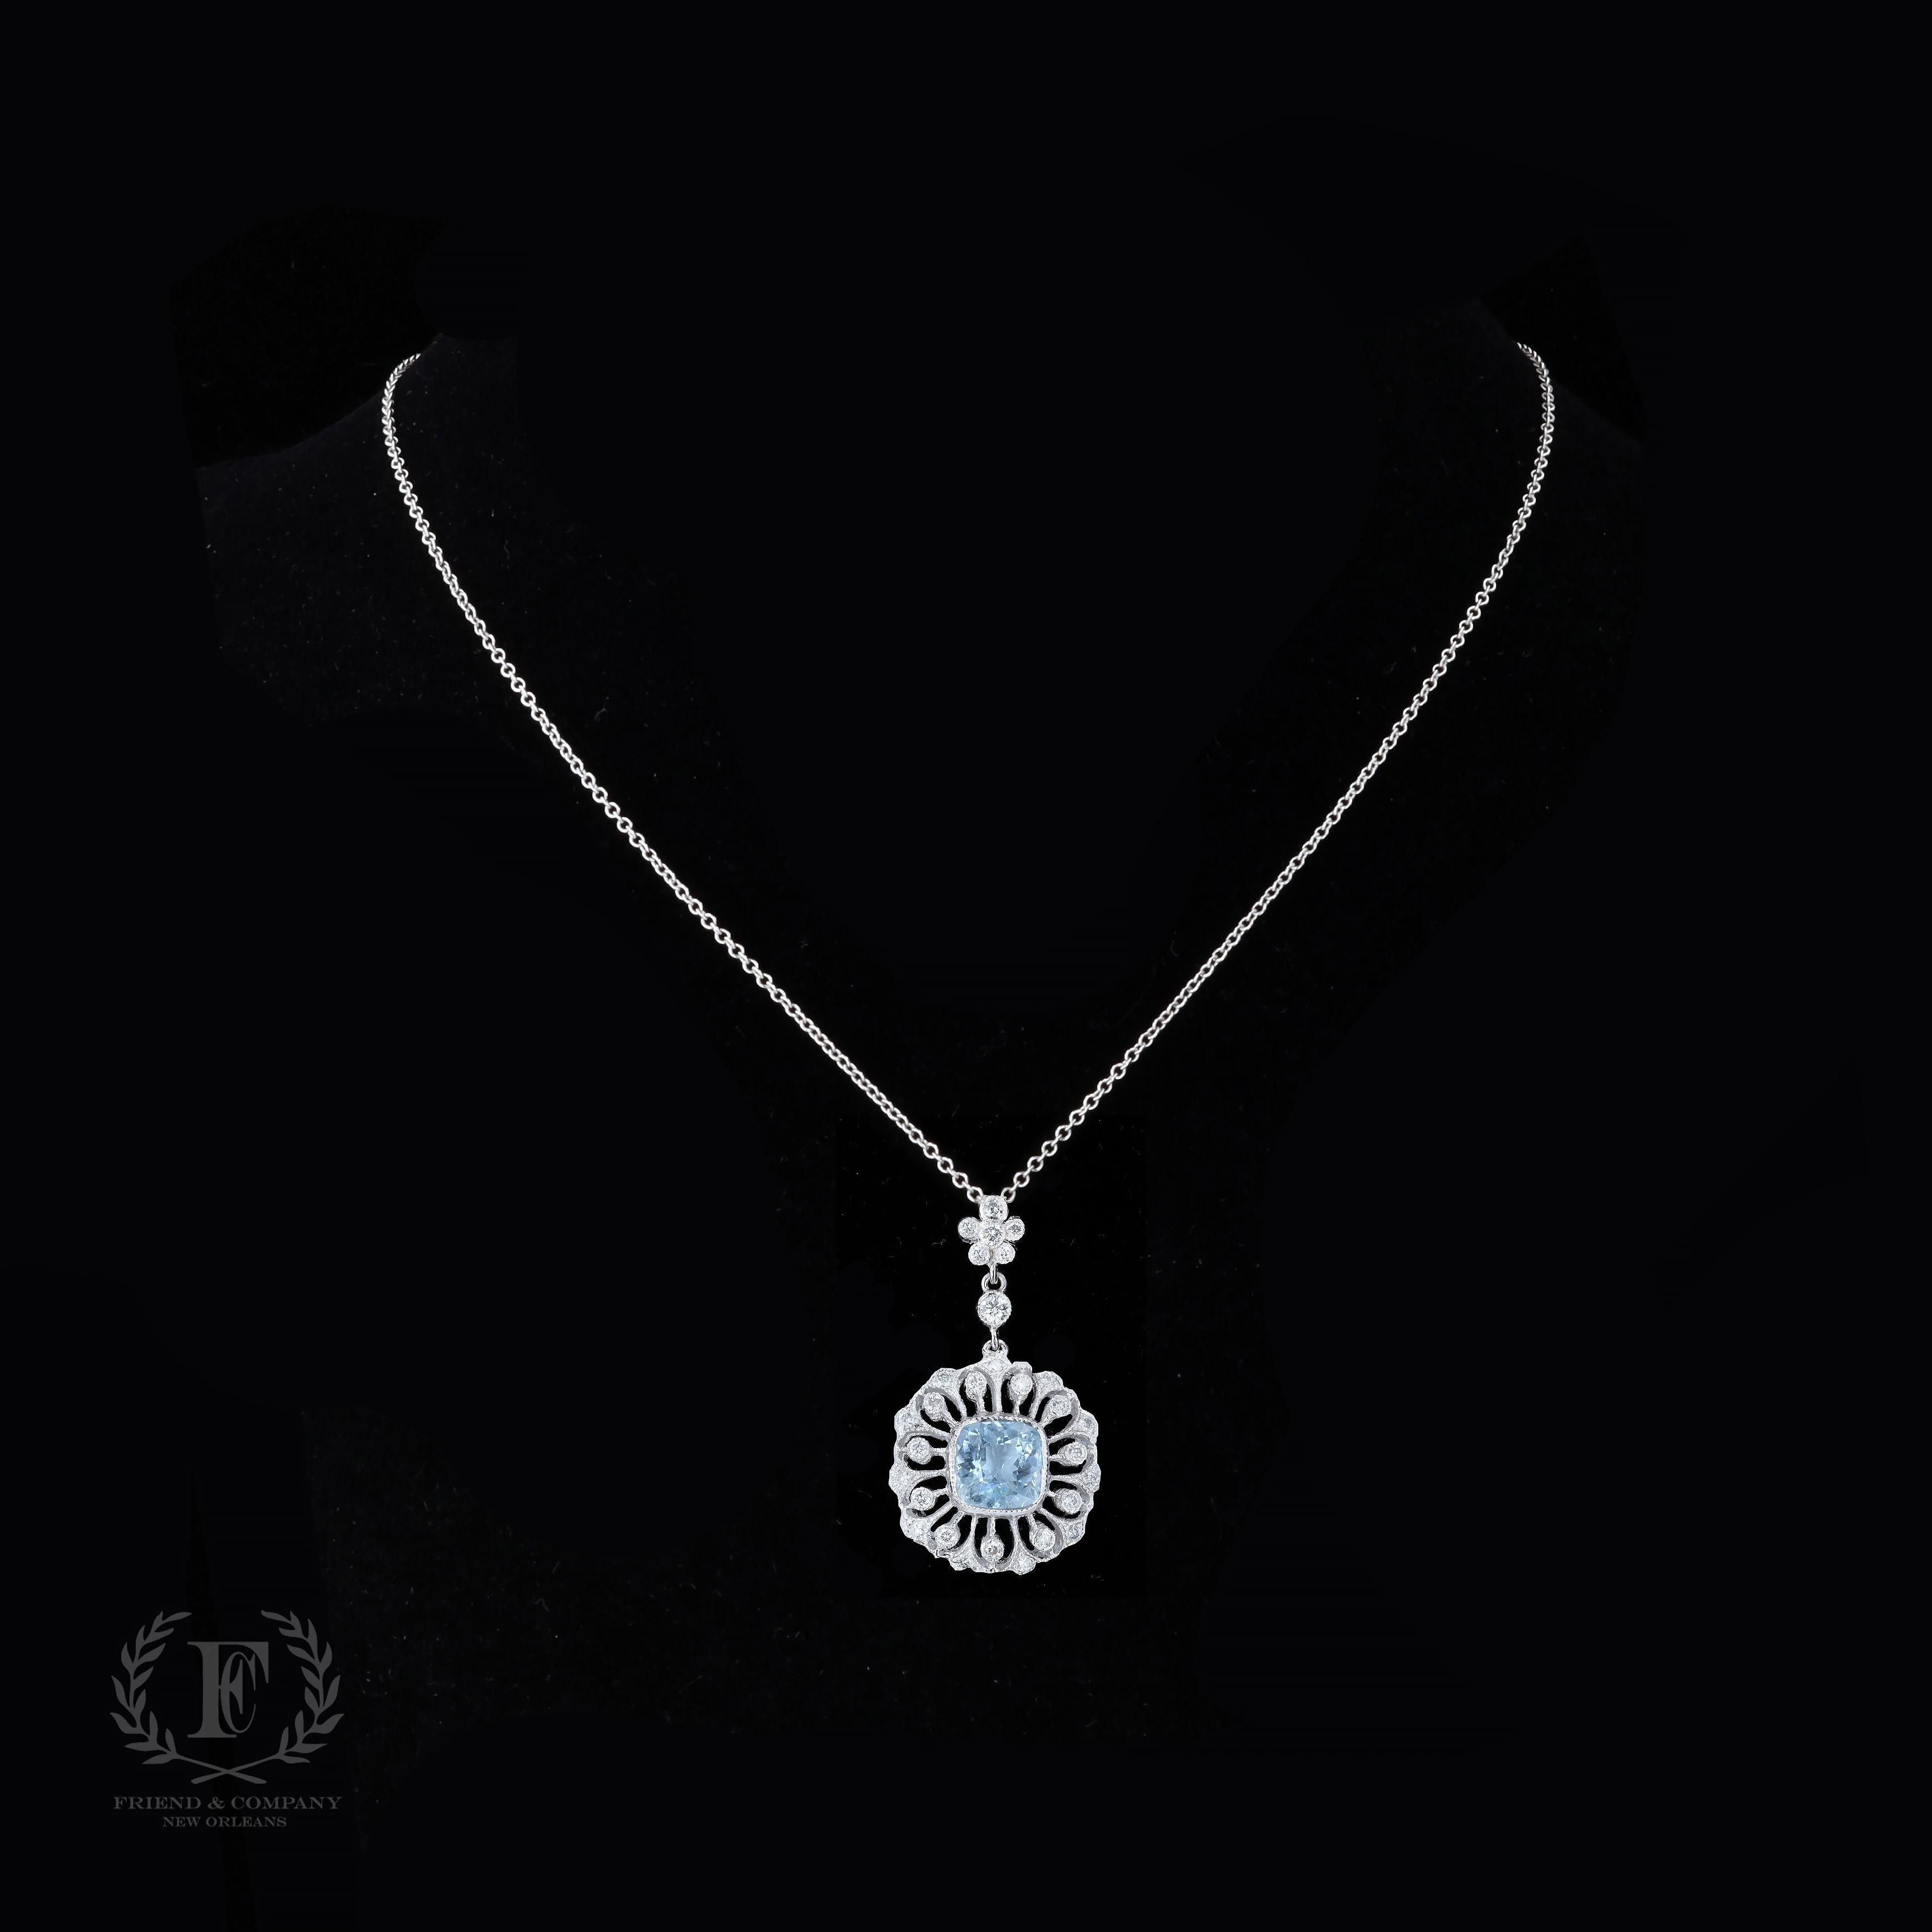 This necklace is an aquamarine dream. The necklace features a gorgeous pendant that is set with cushion cut aquamarines weighing approximately 2.50 carats. The aquamarine is accentuated by round cut diamonds. The pendant measures 31 millimeters by